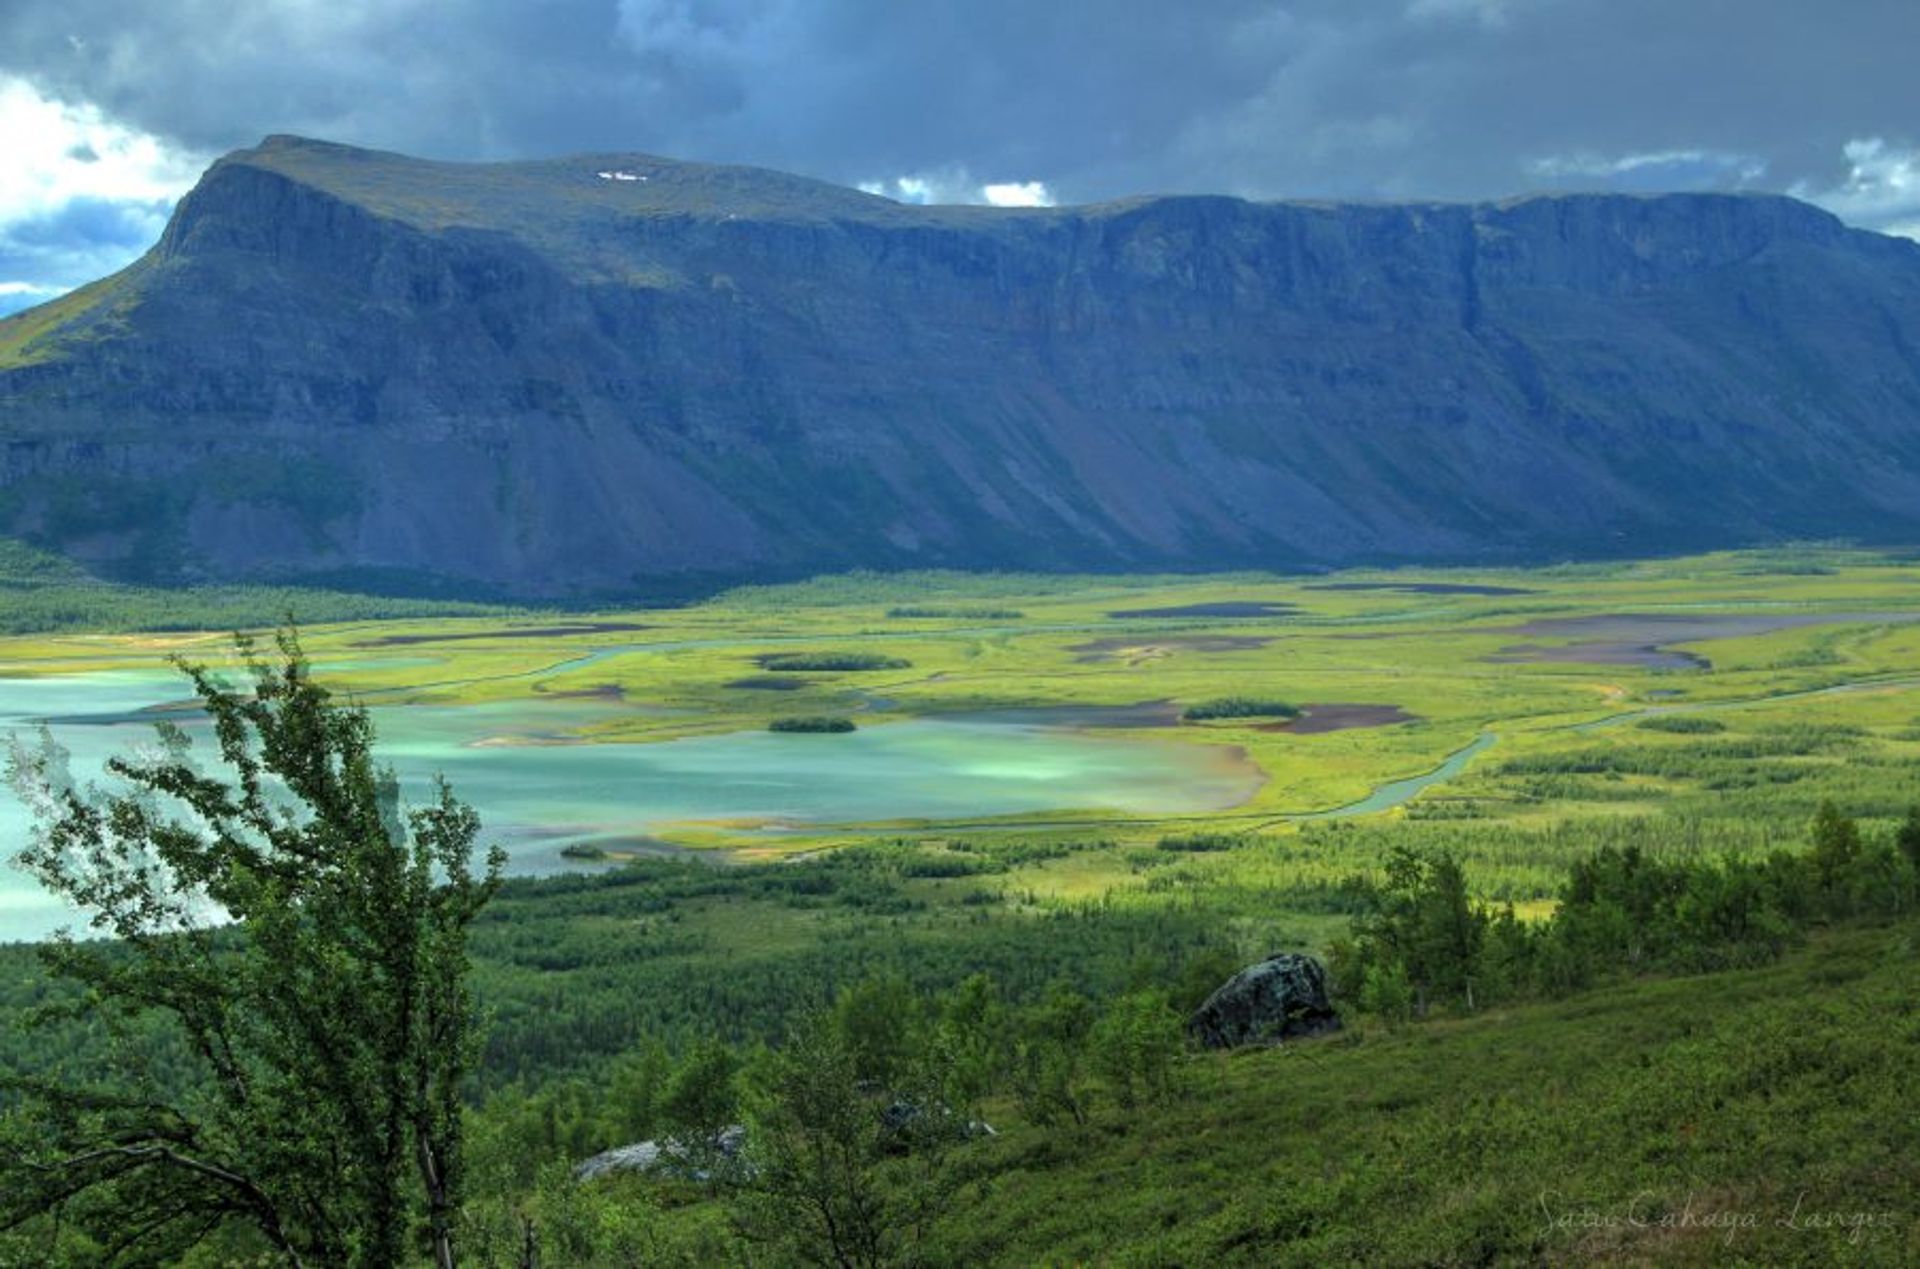 View of Rapadalen from the mountain side.